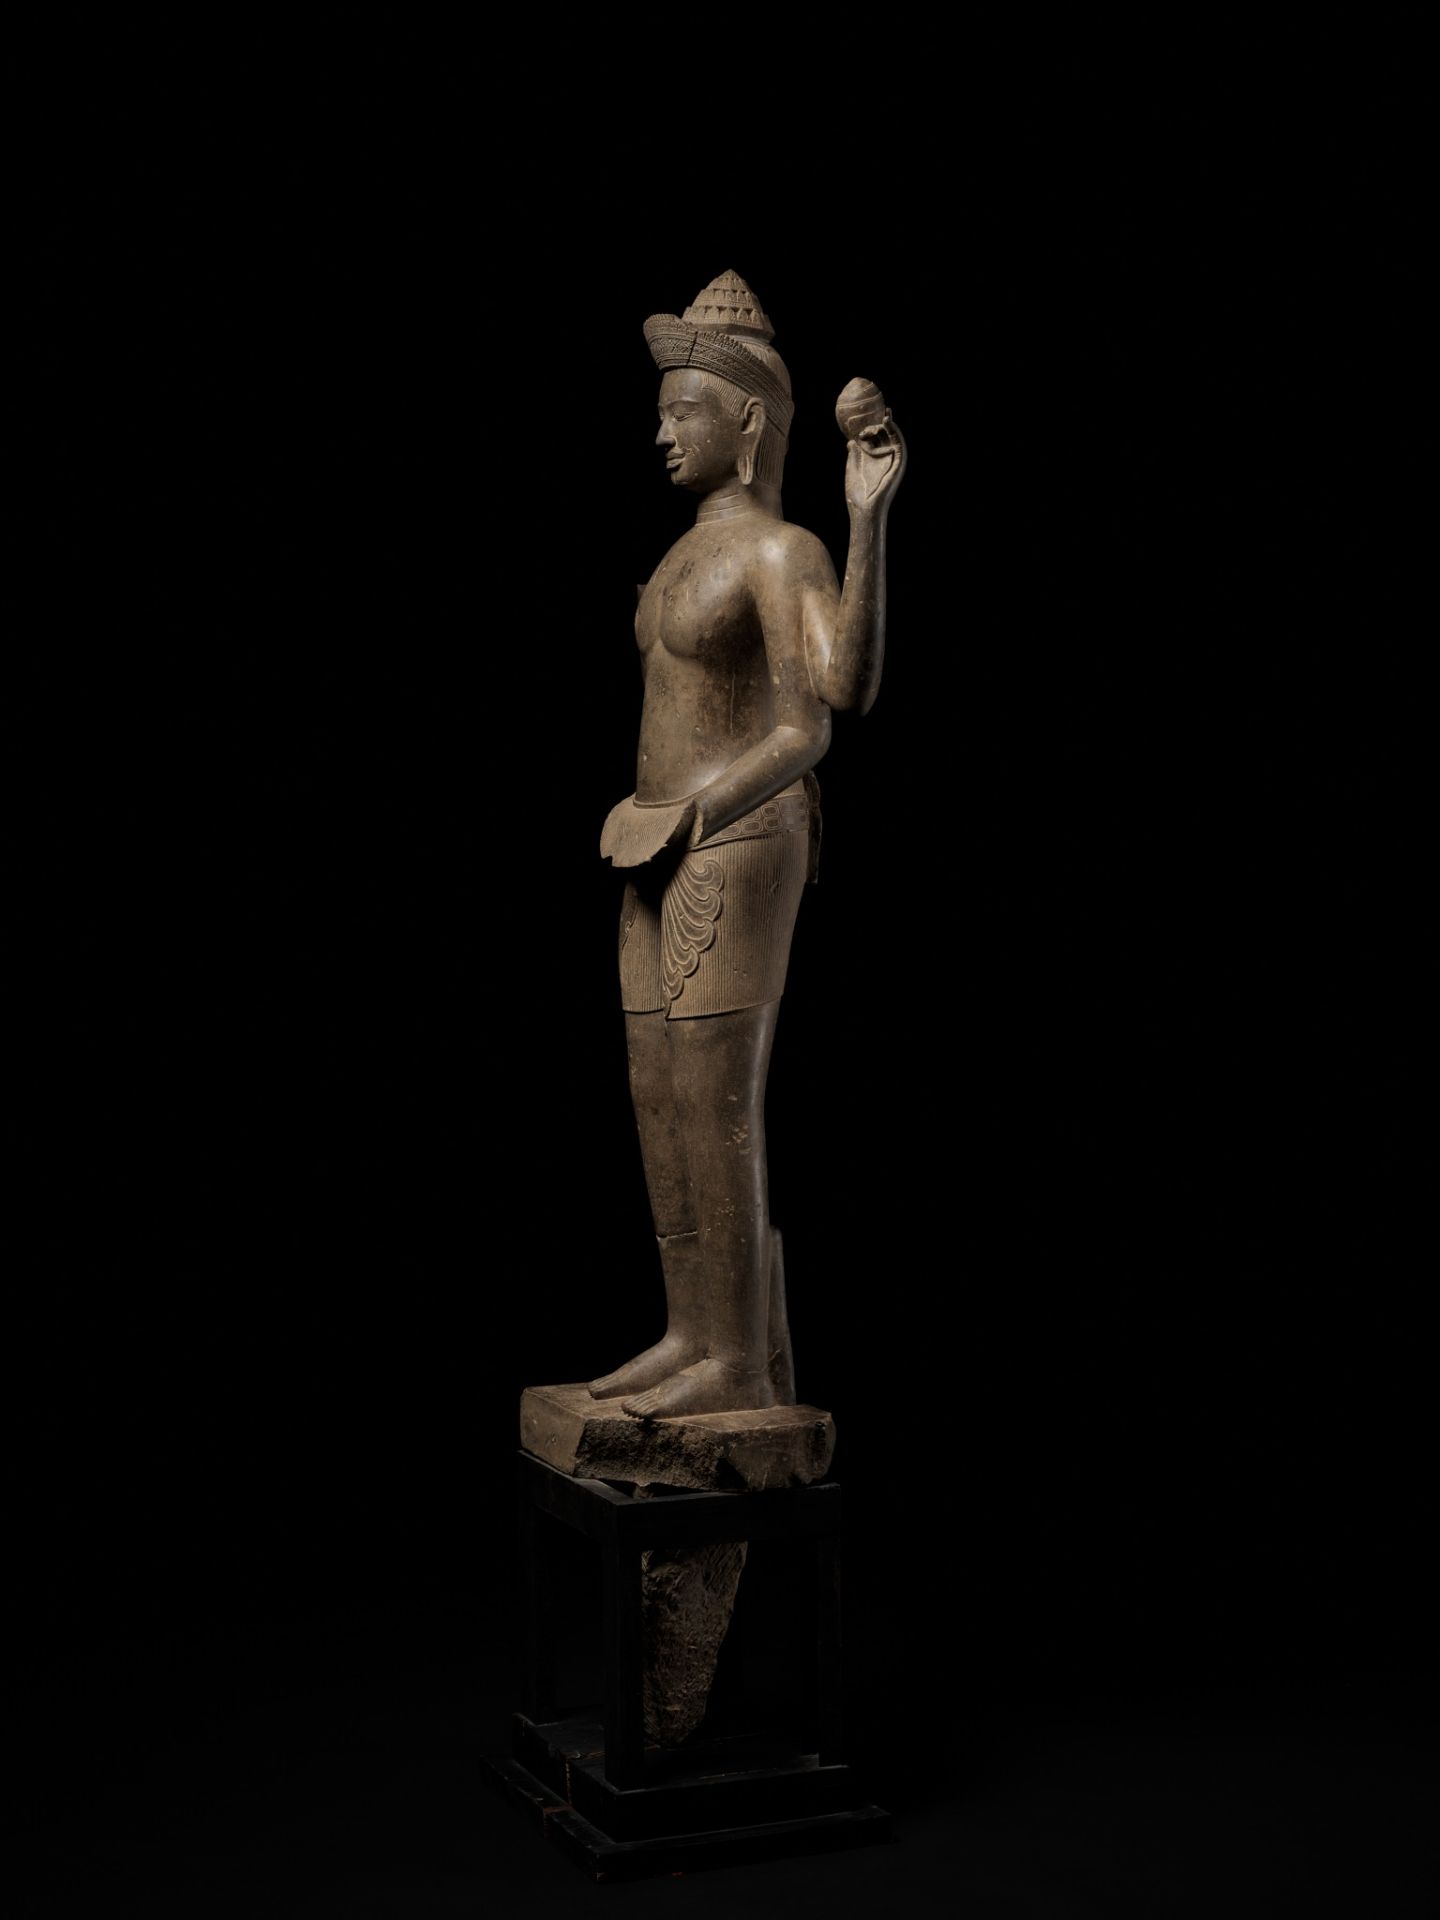 AN EXTREMELY RARE AND MONUMENTAL SANDSTONE STATUE OF VISHNU, ANGKOR PERIOD - Image 12 of 17